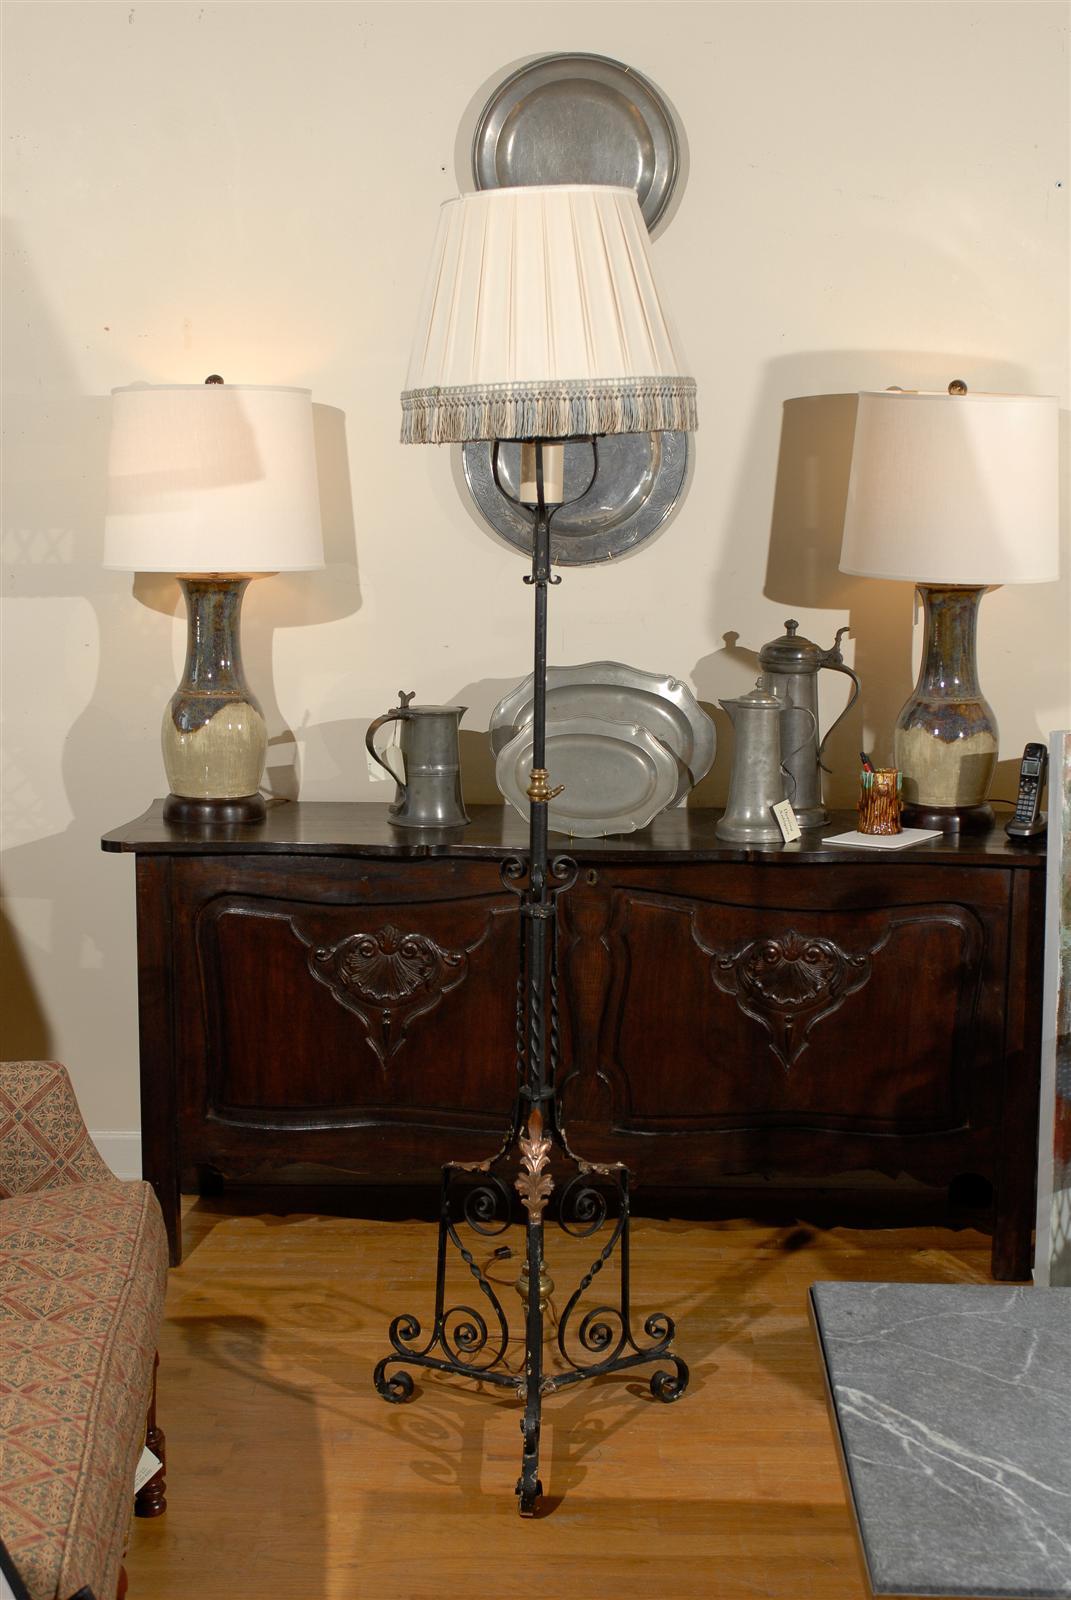 This is a floor lamp with copper leaves and intricate details on the base that travel up to the shade. The shade is handmade and has nice multicolored fringe and would be a great addition to any room.